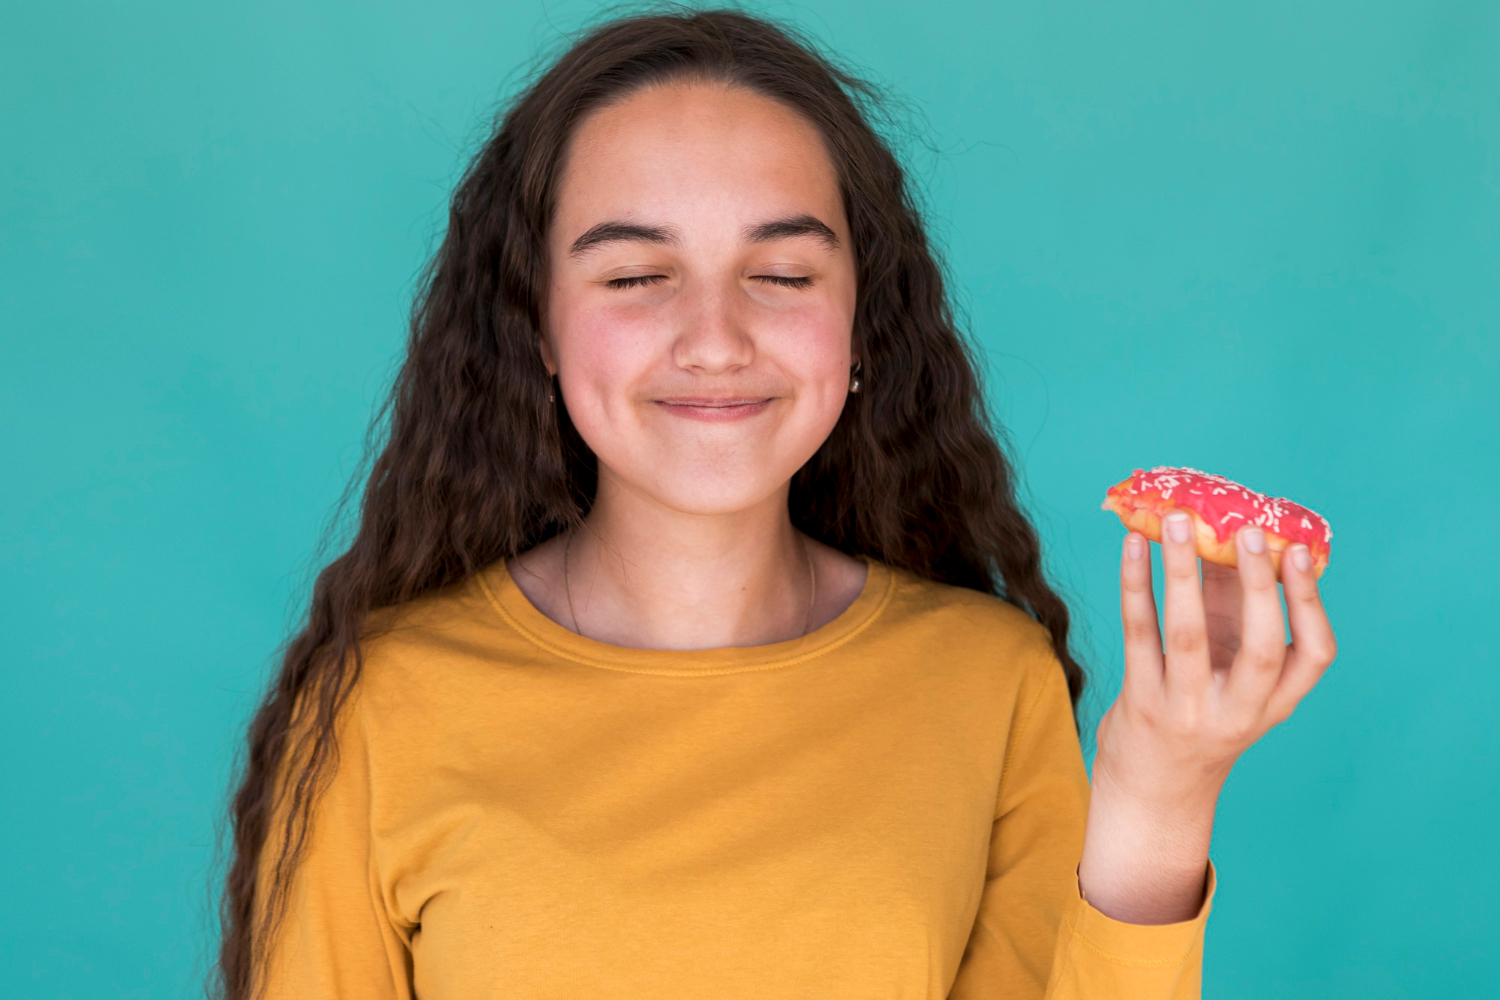 Image of a girl eating a donut.